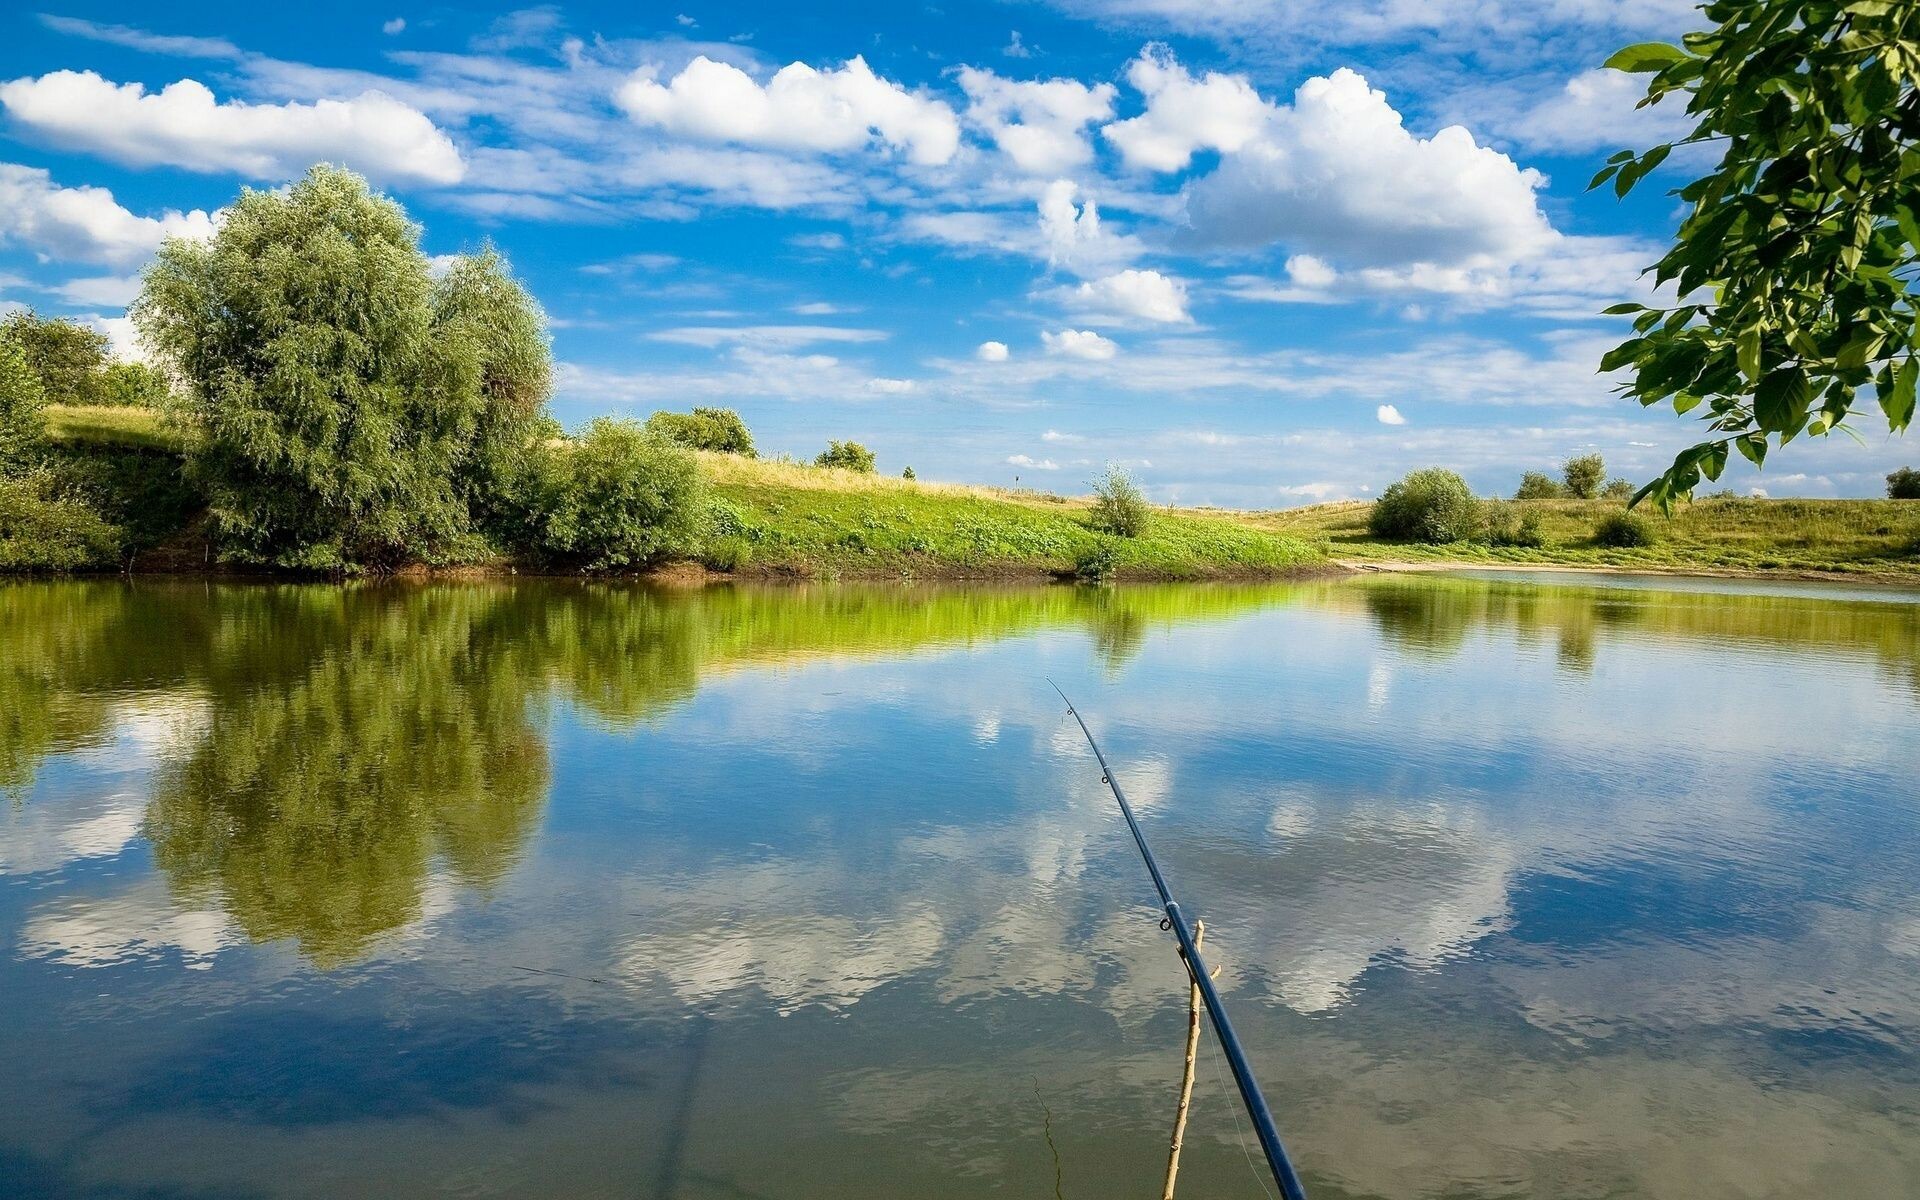 Lake fishing beauty, Captivating waters, Peaceful nature, Angler's delight, 1920x1200 HD Desktop